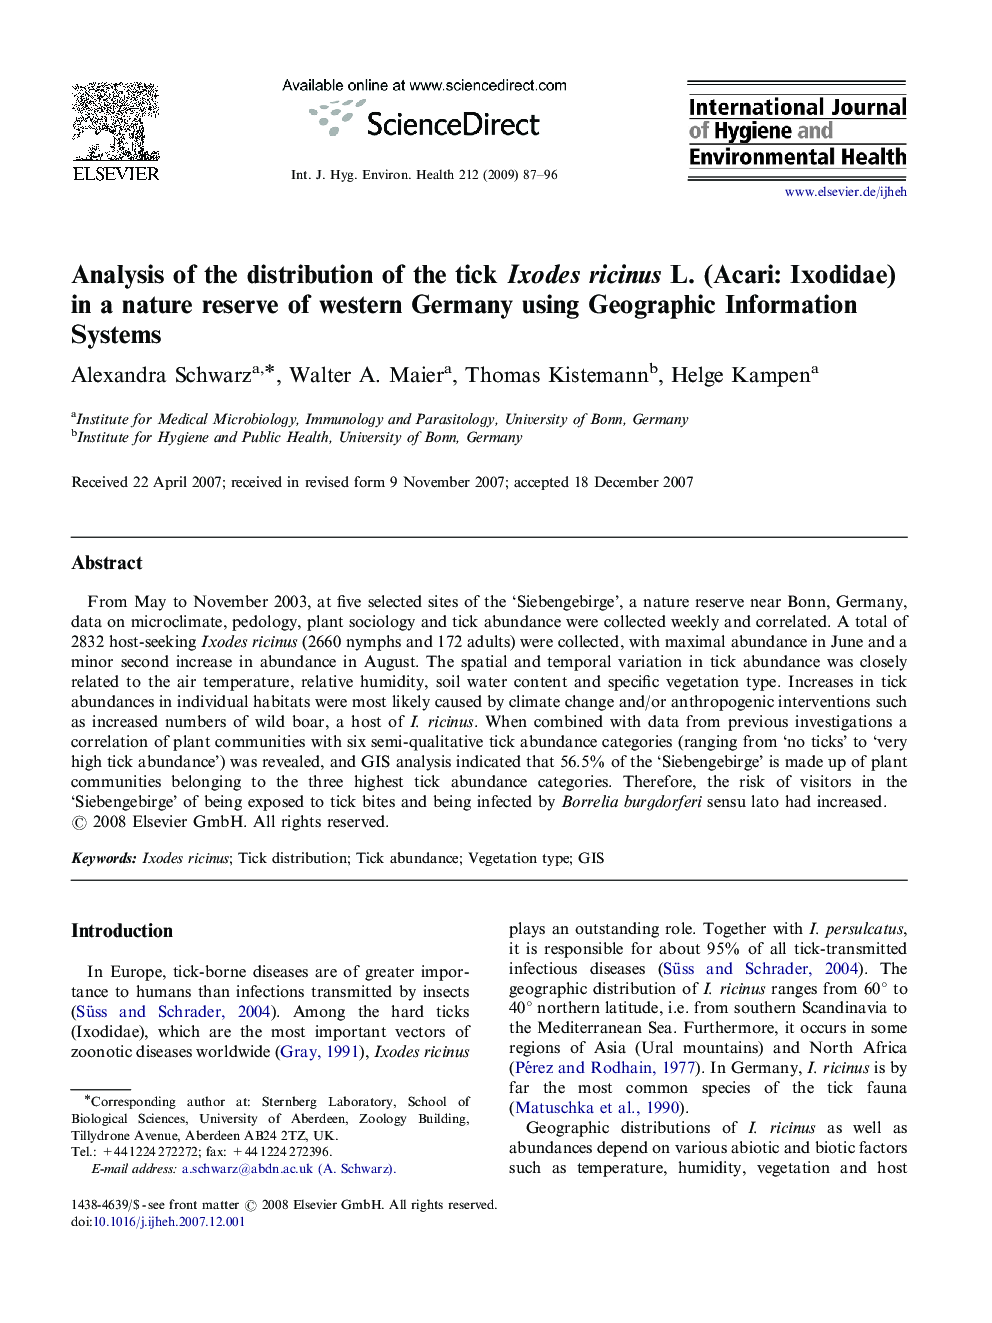 Analysis of the distribution of the tick Ixodes ricinus L. (Acari: Ixodidae) in a nature reserve of western Germany using Geographic Information Systems